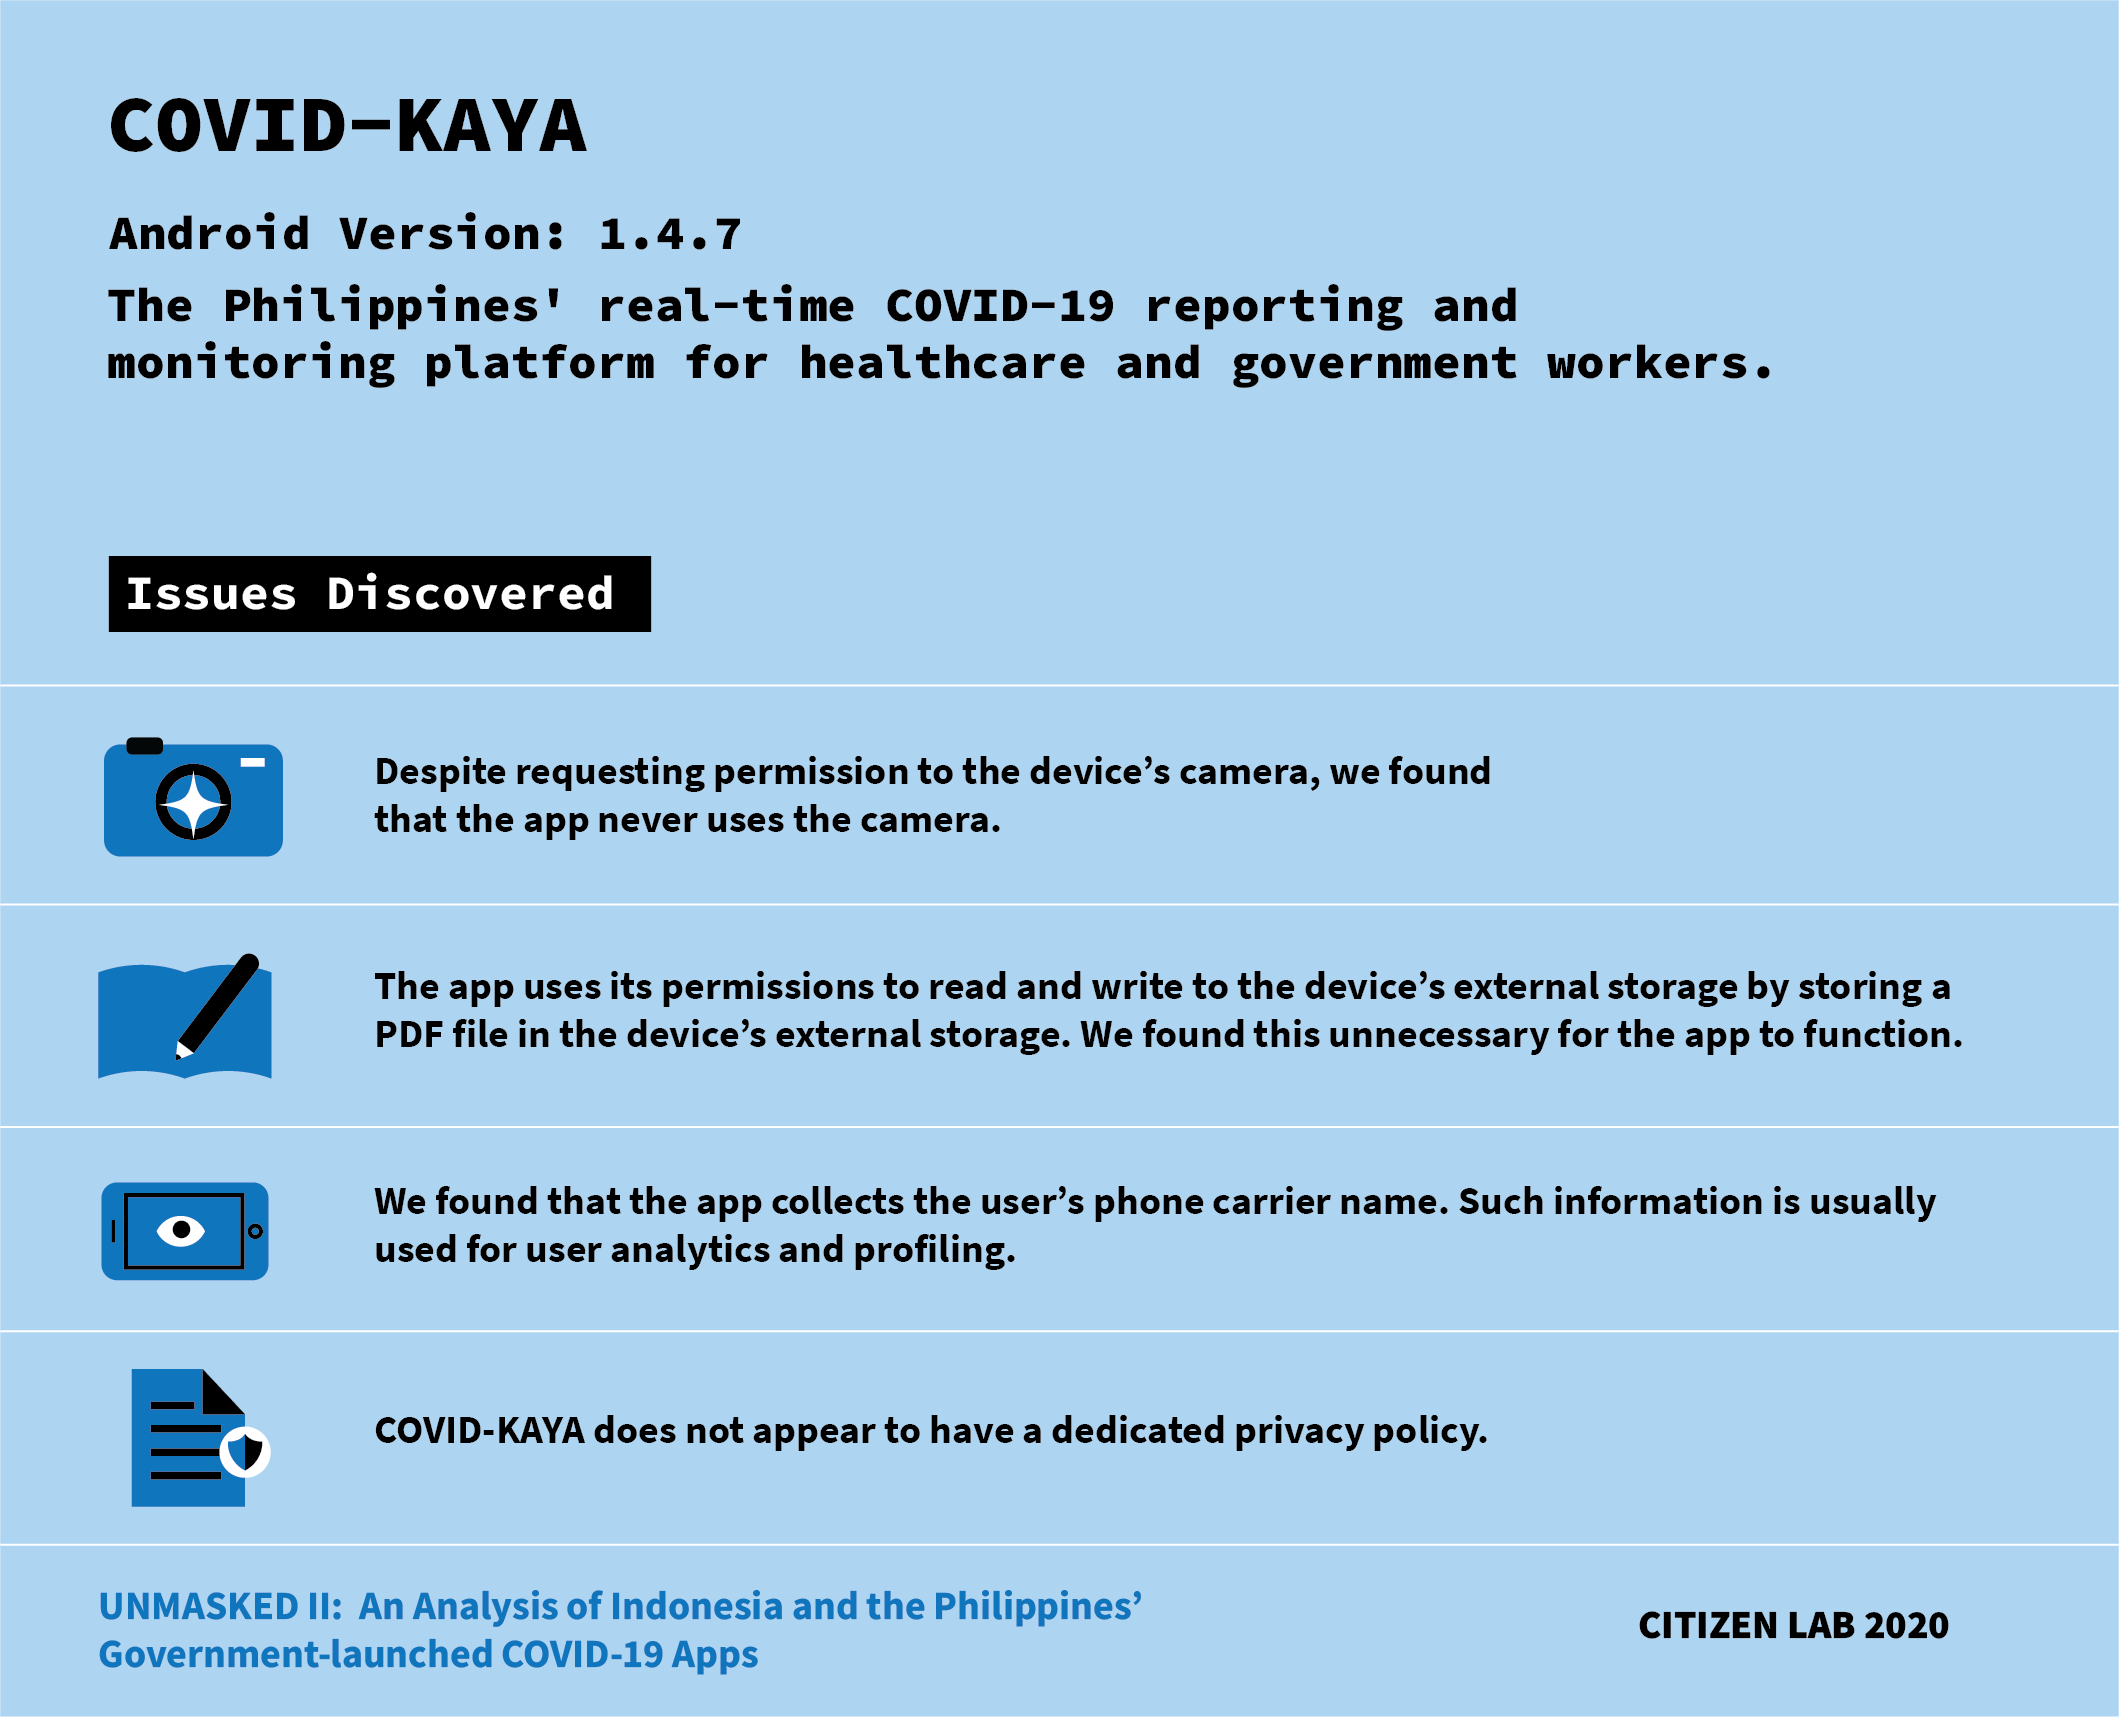 List of issues discovered on the Covid-19 app COVID-KAYA. 